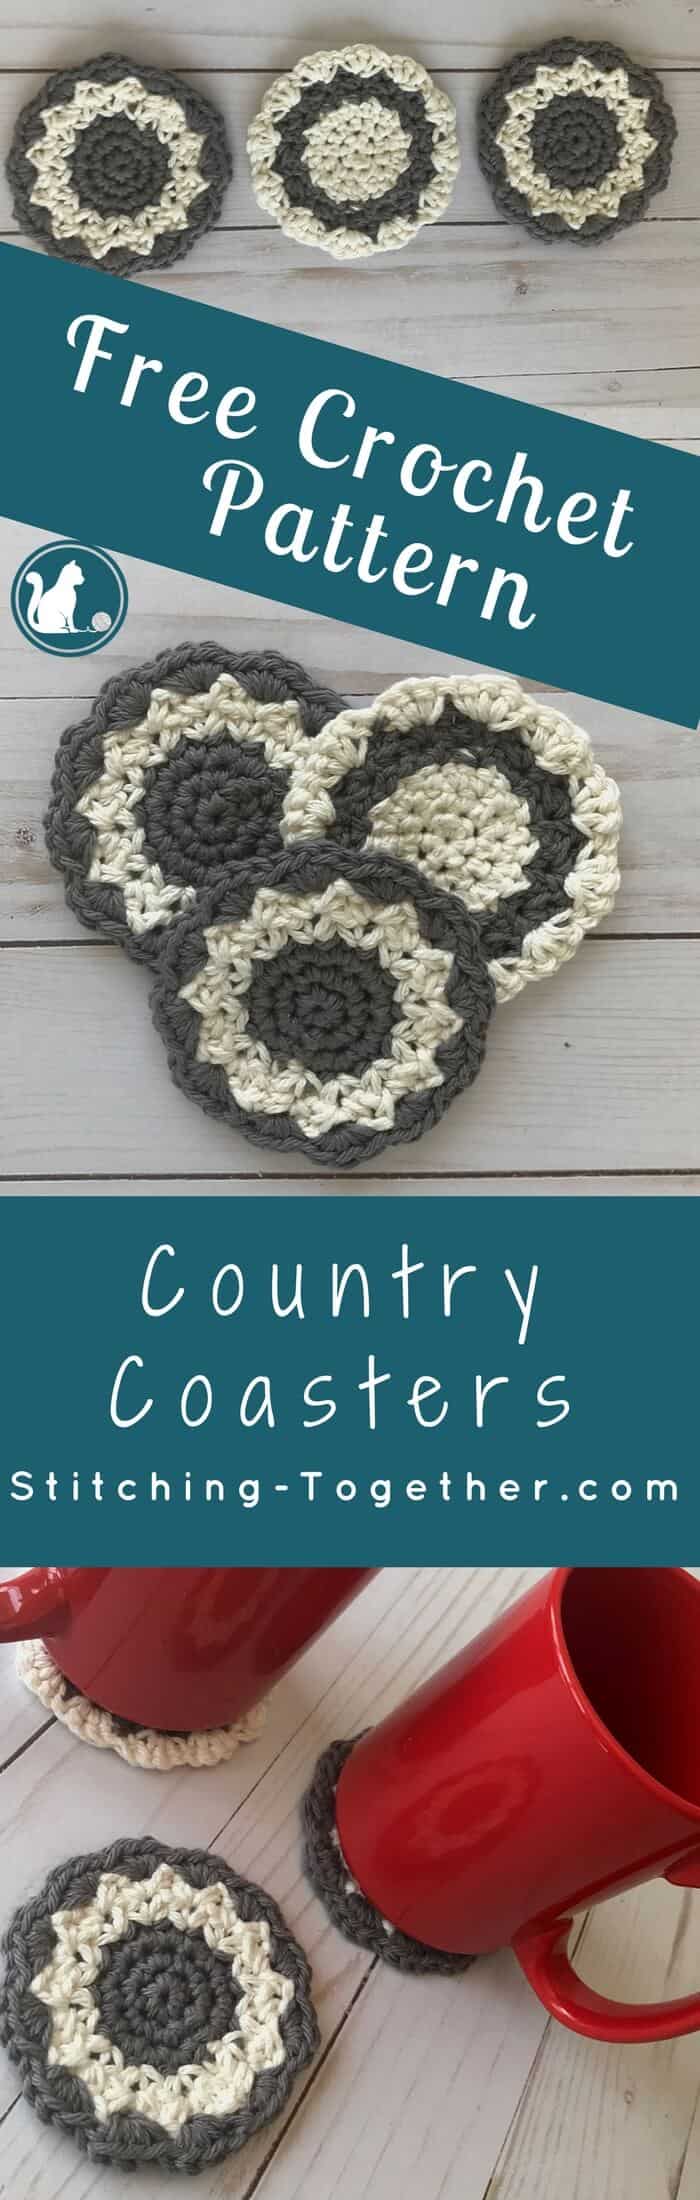 These cute crochet country coasters would look great on your coffee table! They are so quick to crochet and add great farmhouse style to any decor. Visit the blog to get the free crochet pattern!